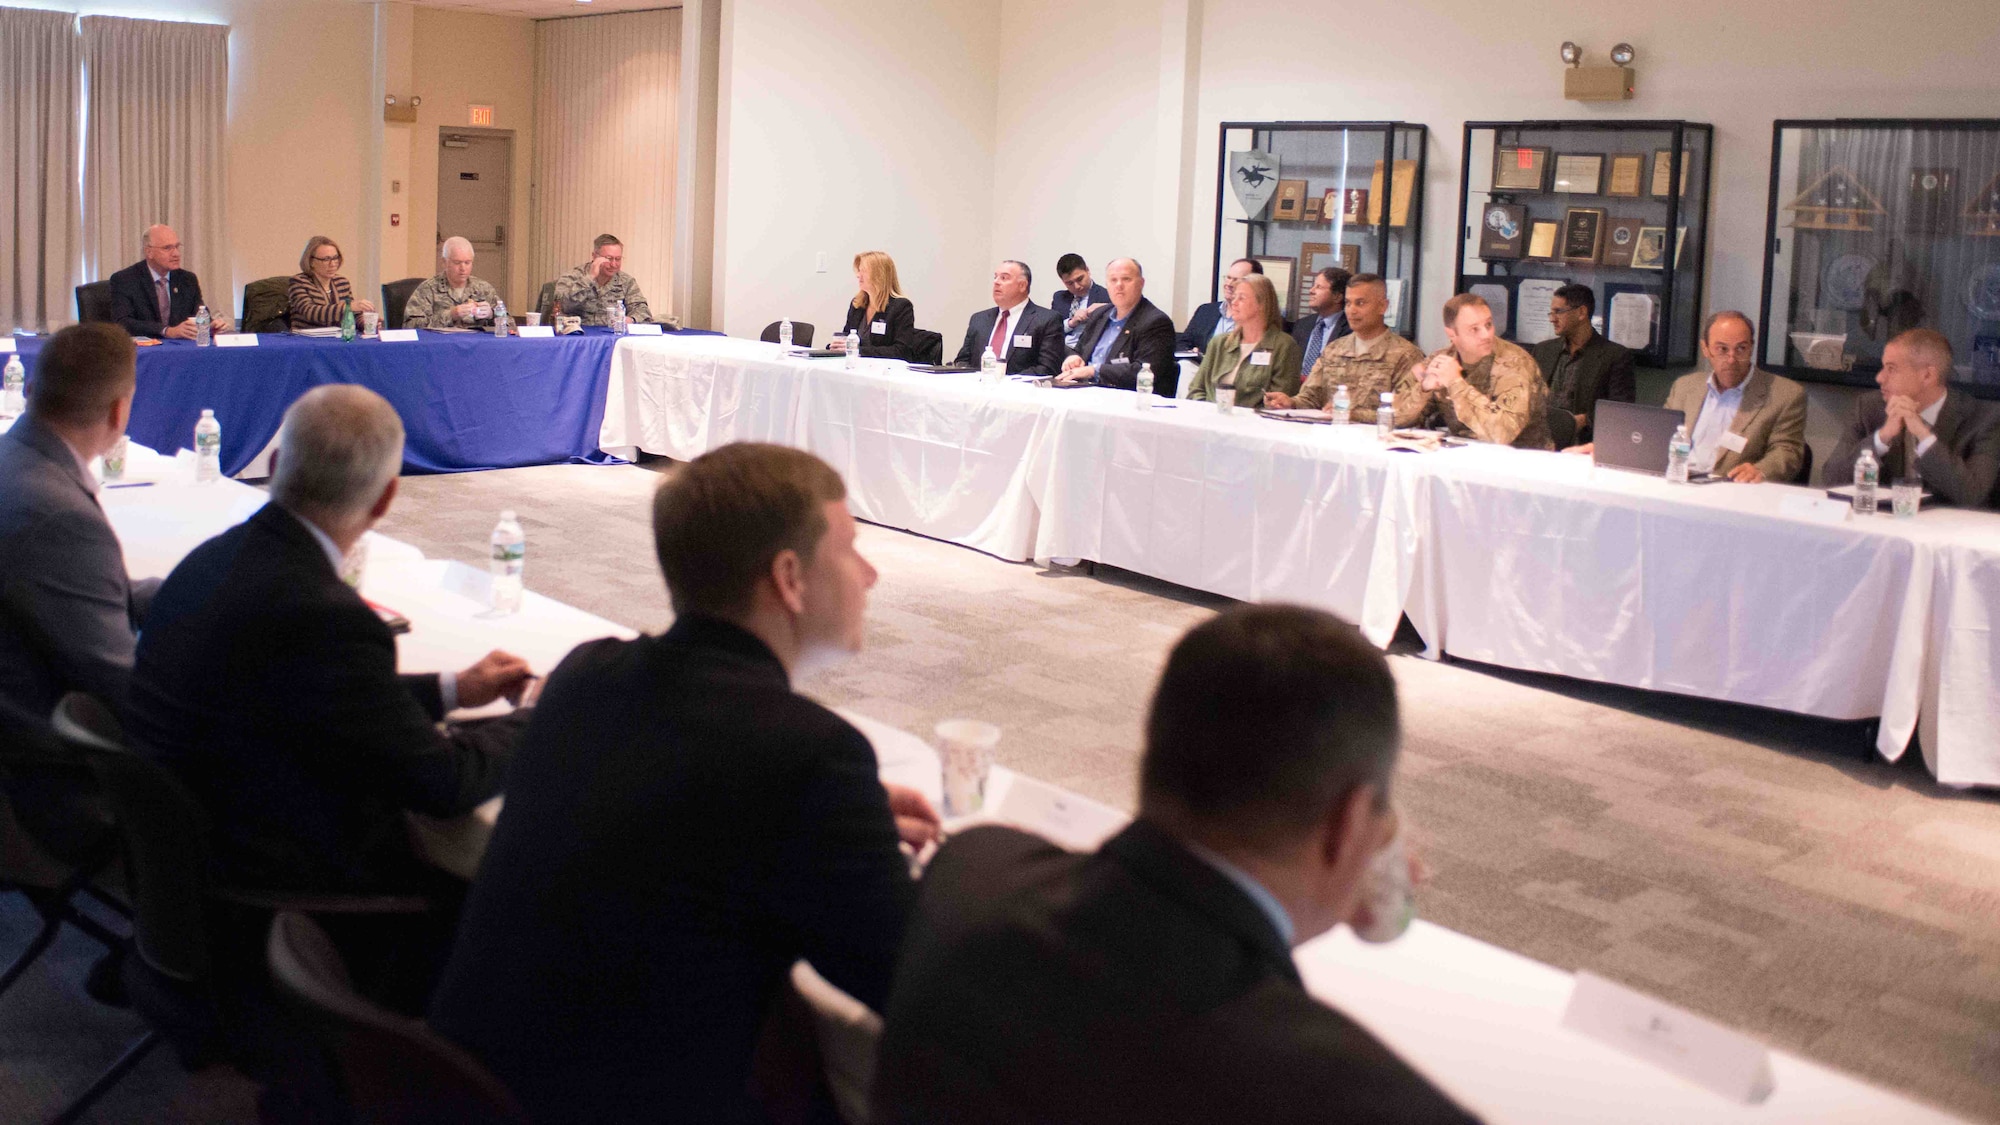 The 102nd Intelligence Wing hosts a number of high-ranking military and government officials as well as innovators from several high-tech energy companies during a leadership summit at Otis Air National Guard Base Oct. 25, 2016. The summit focused on the upcoming Otis Microgrid Project, an electrical network that ties into renewable energy sources, can operate if the commercial network fails, and allows the base to reduce its energy costs.(Air National Guard photo by Mr. Timothy Sandland/released)